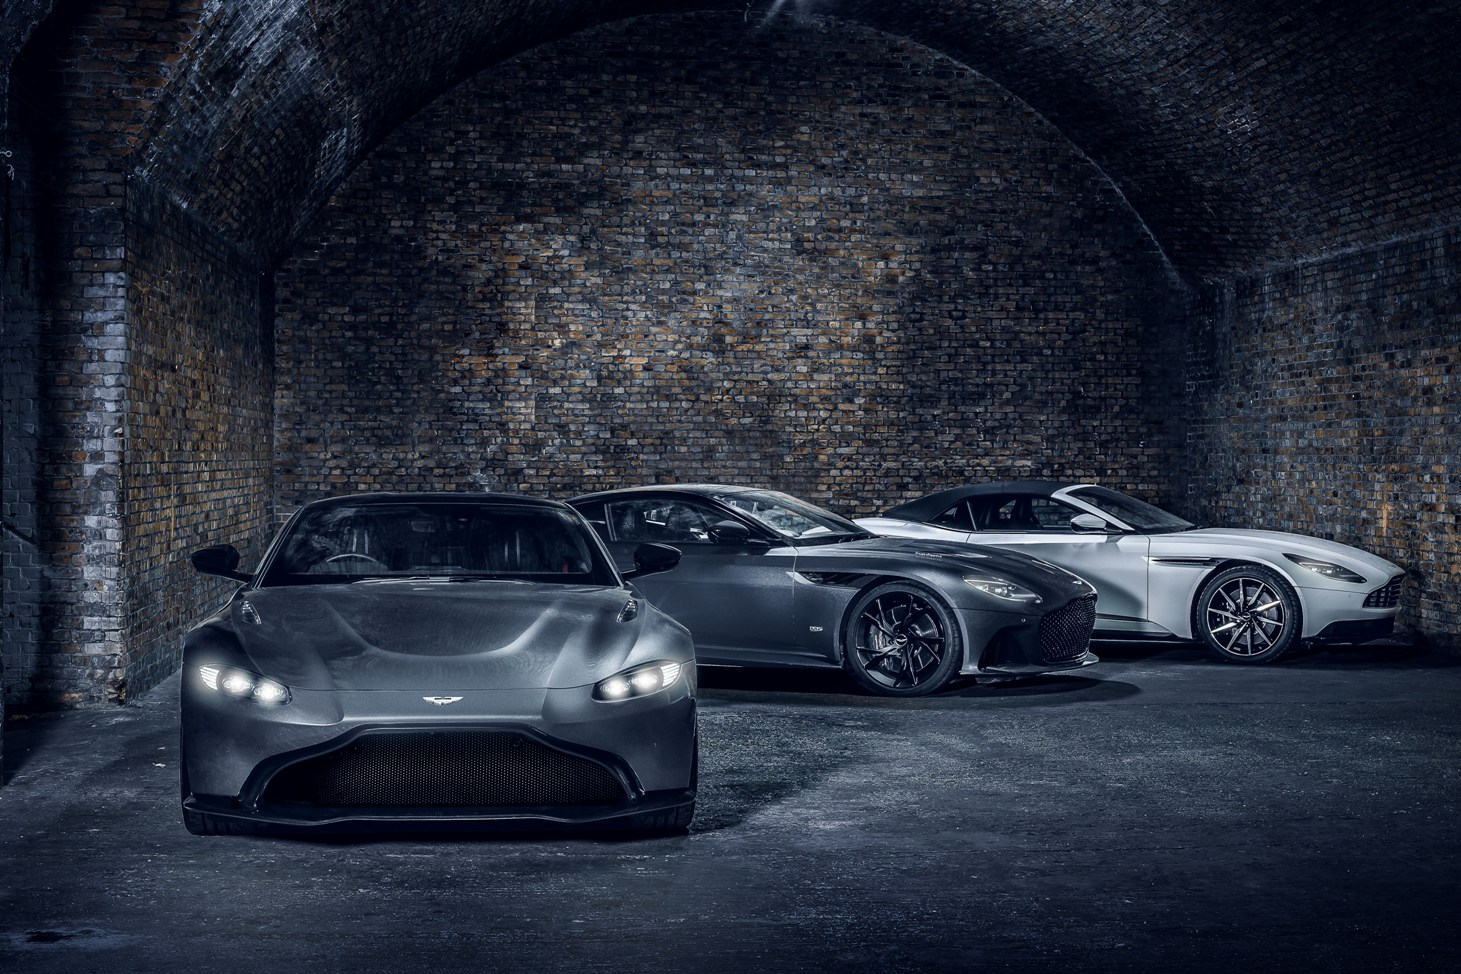 Aston Martin Service Interval Requirements Relaxed to Give Peace of Mind for Customers